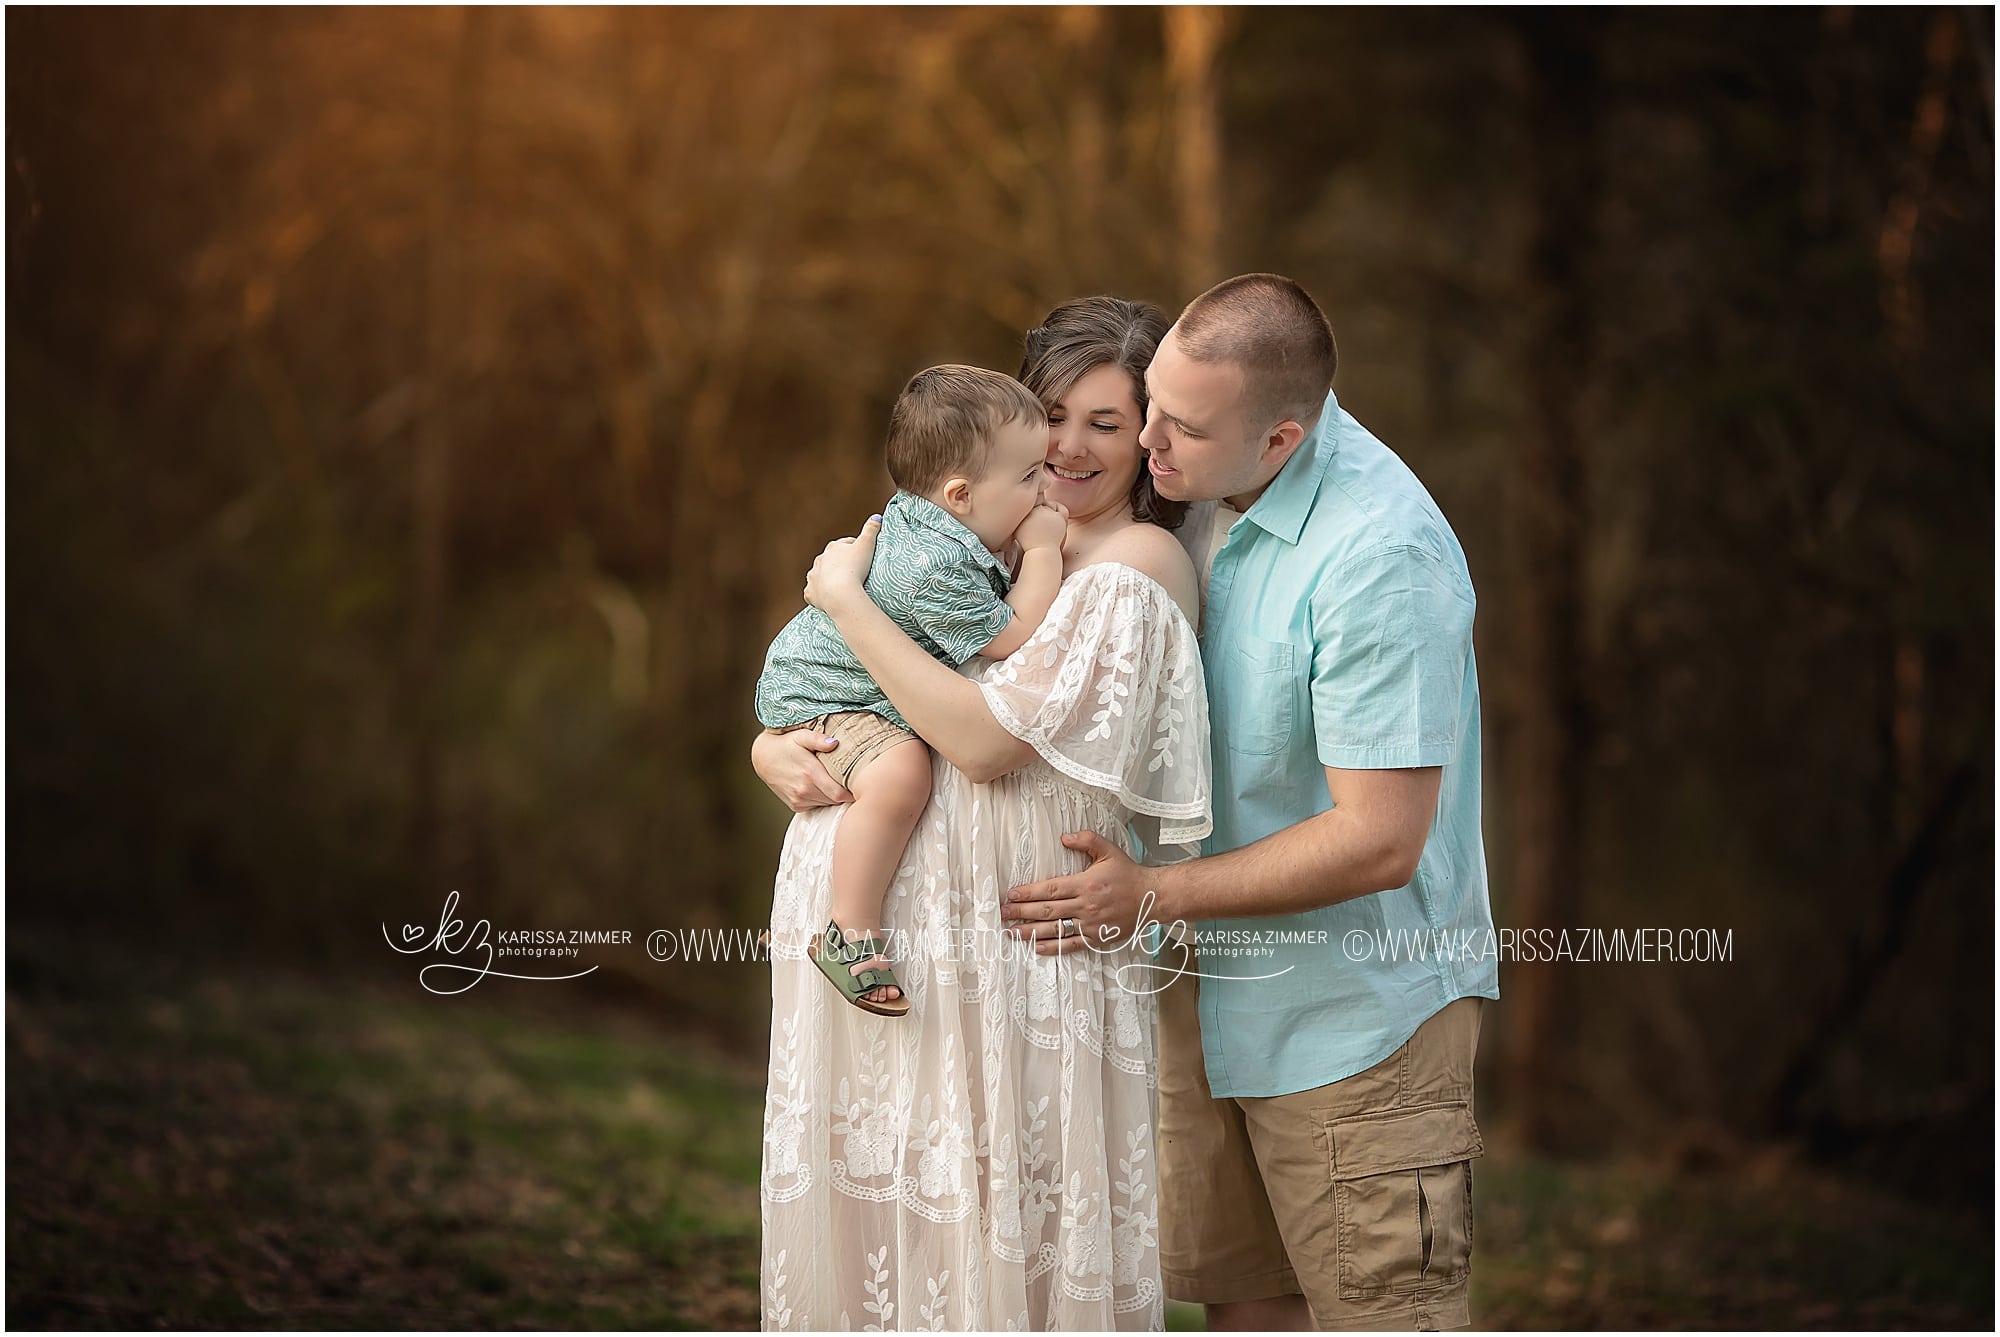 family of 3 embraces at their maternity photography session